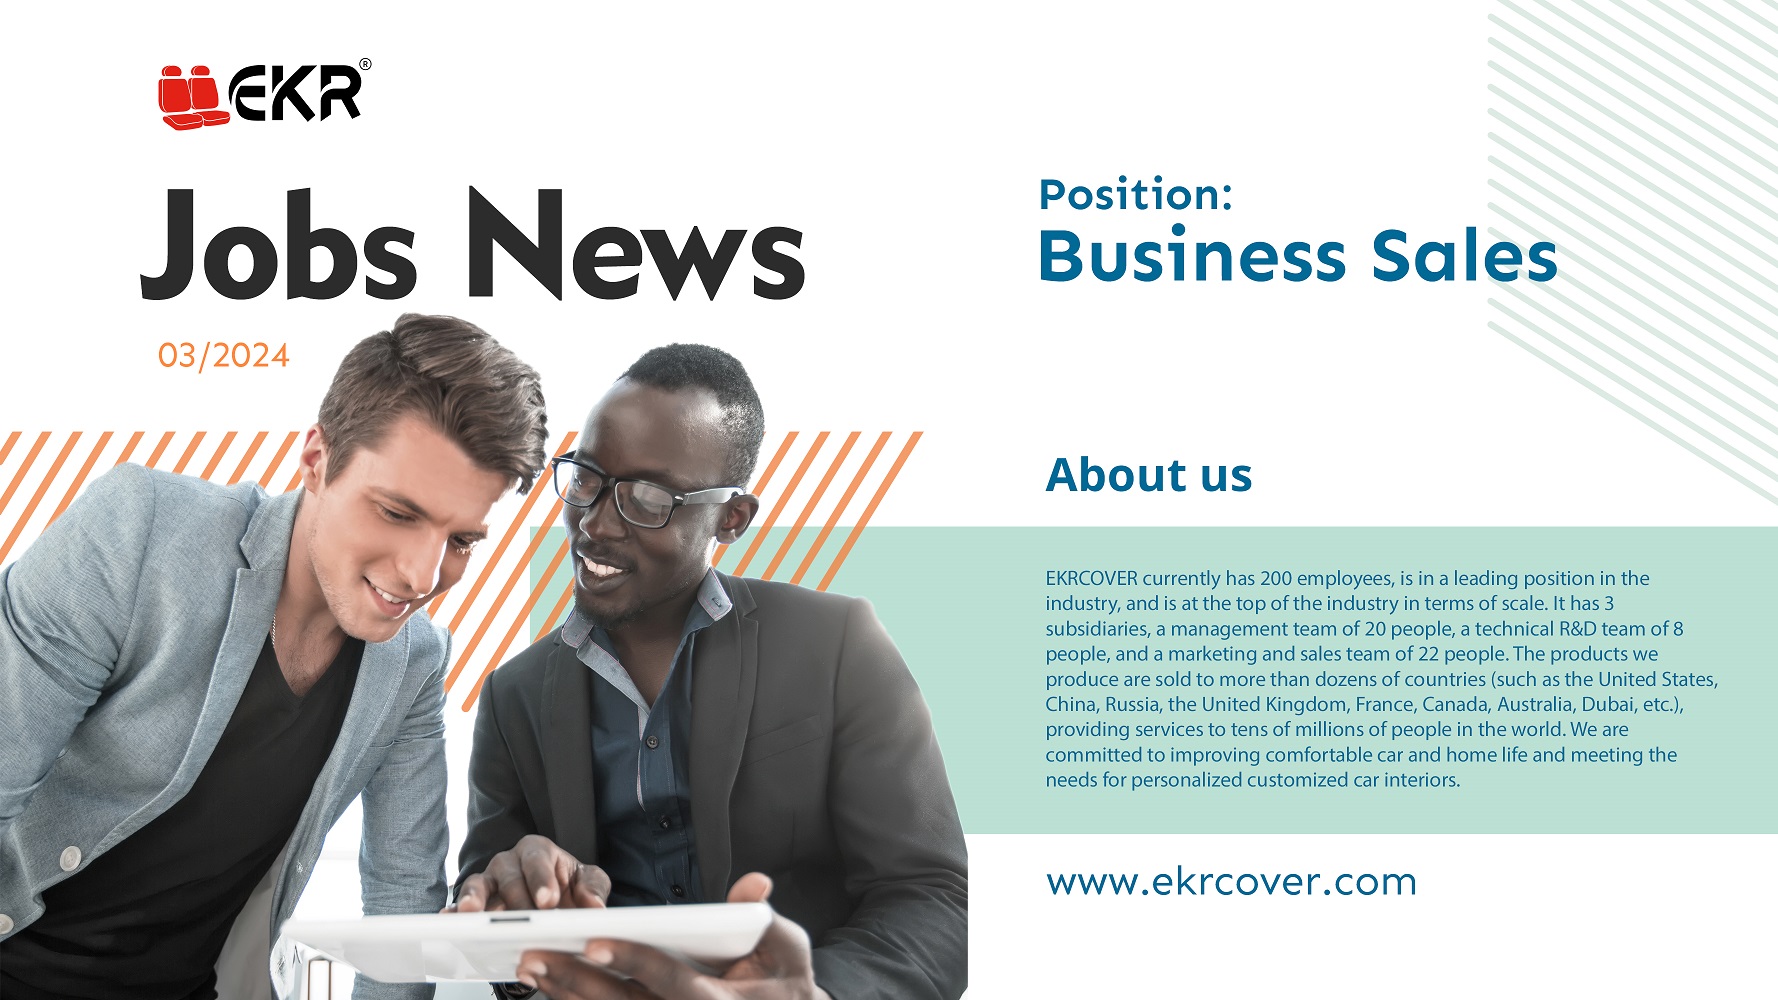 Recruitment for sales business positions at ekrcover